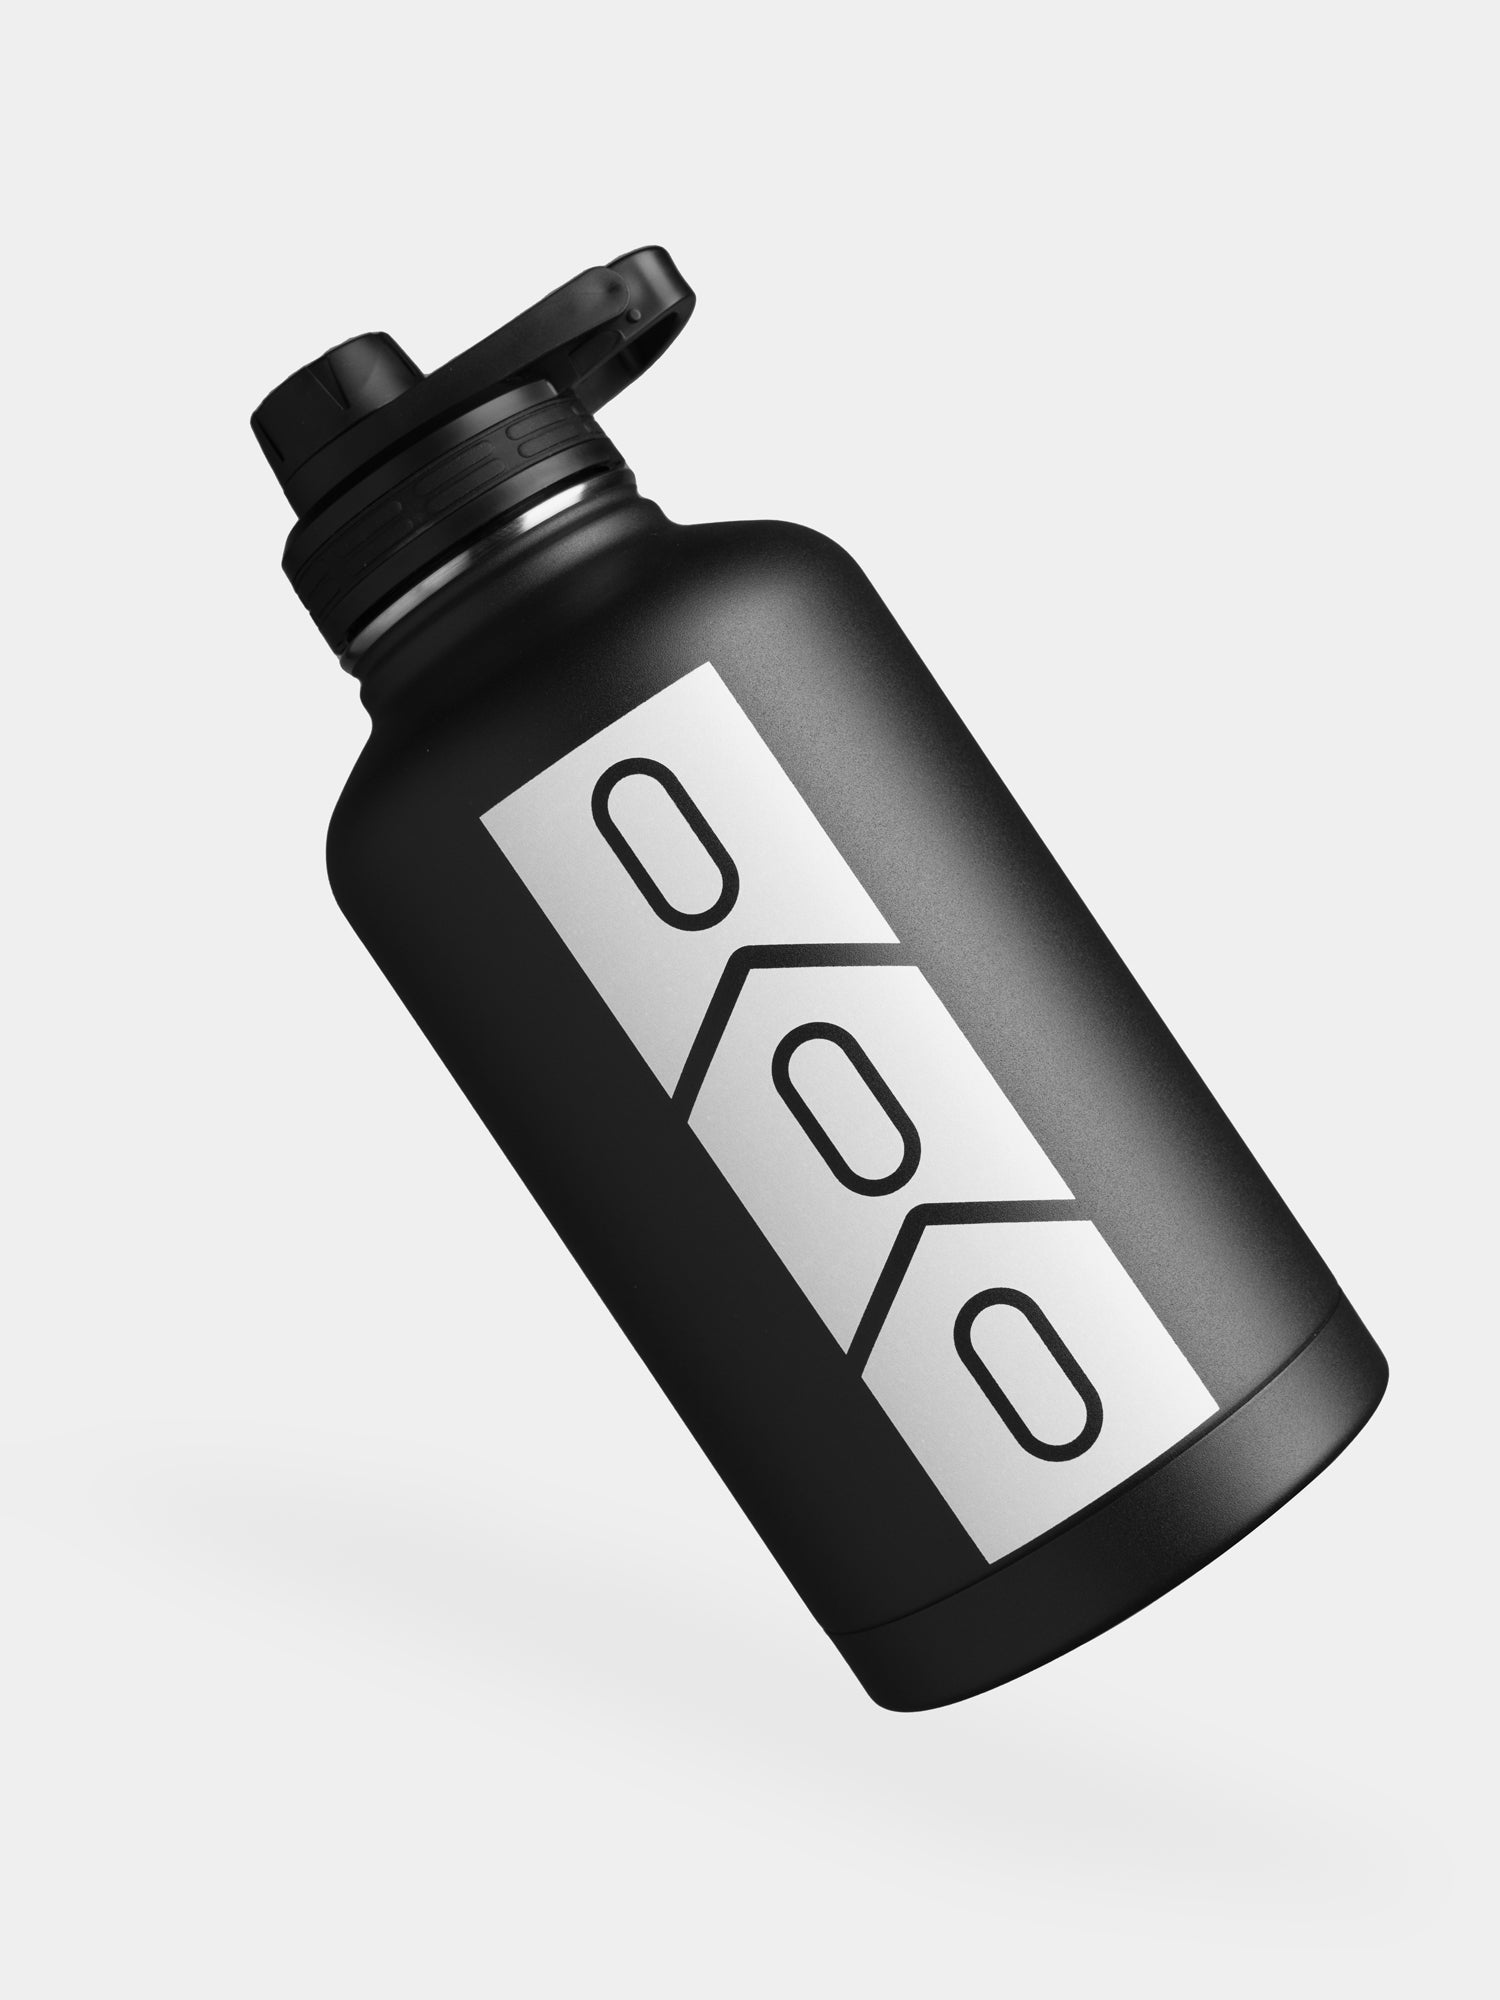 Capacitor Insulated Water Bottle - 64oz – Linus Tech Tips Store